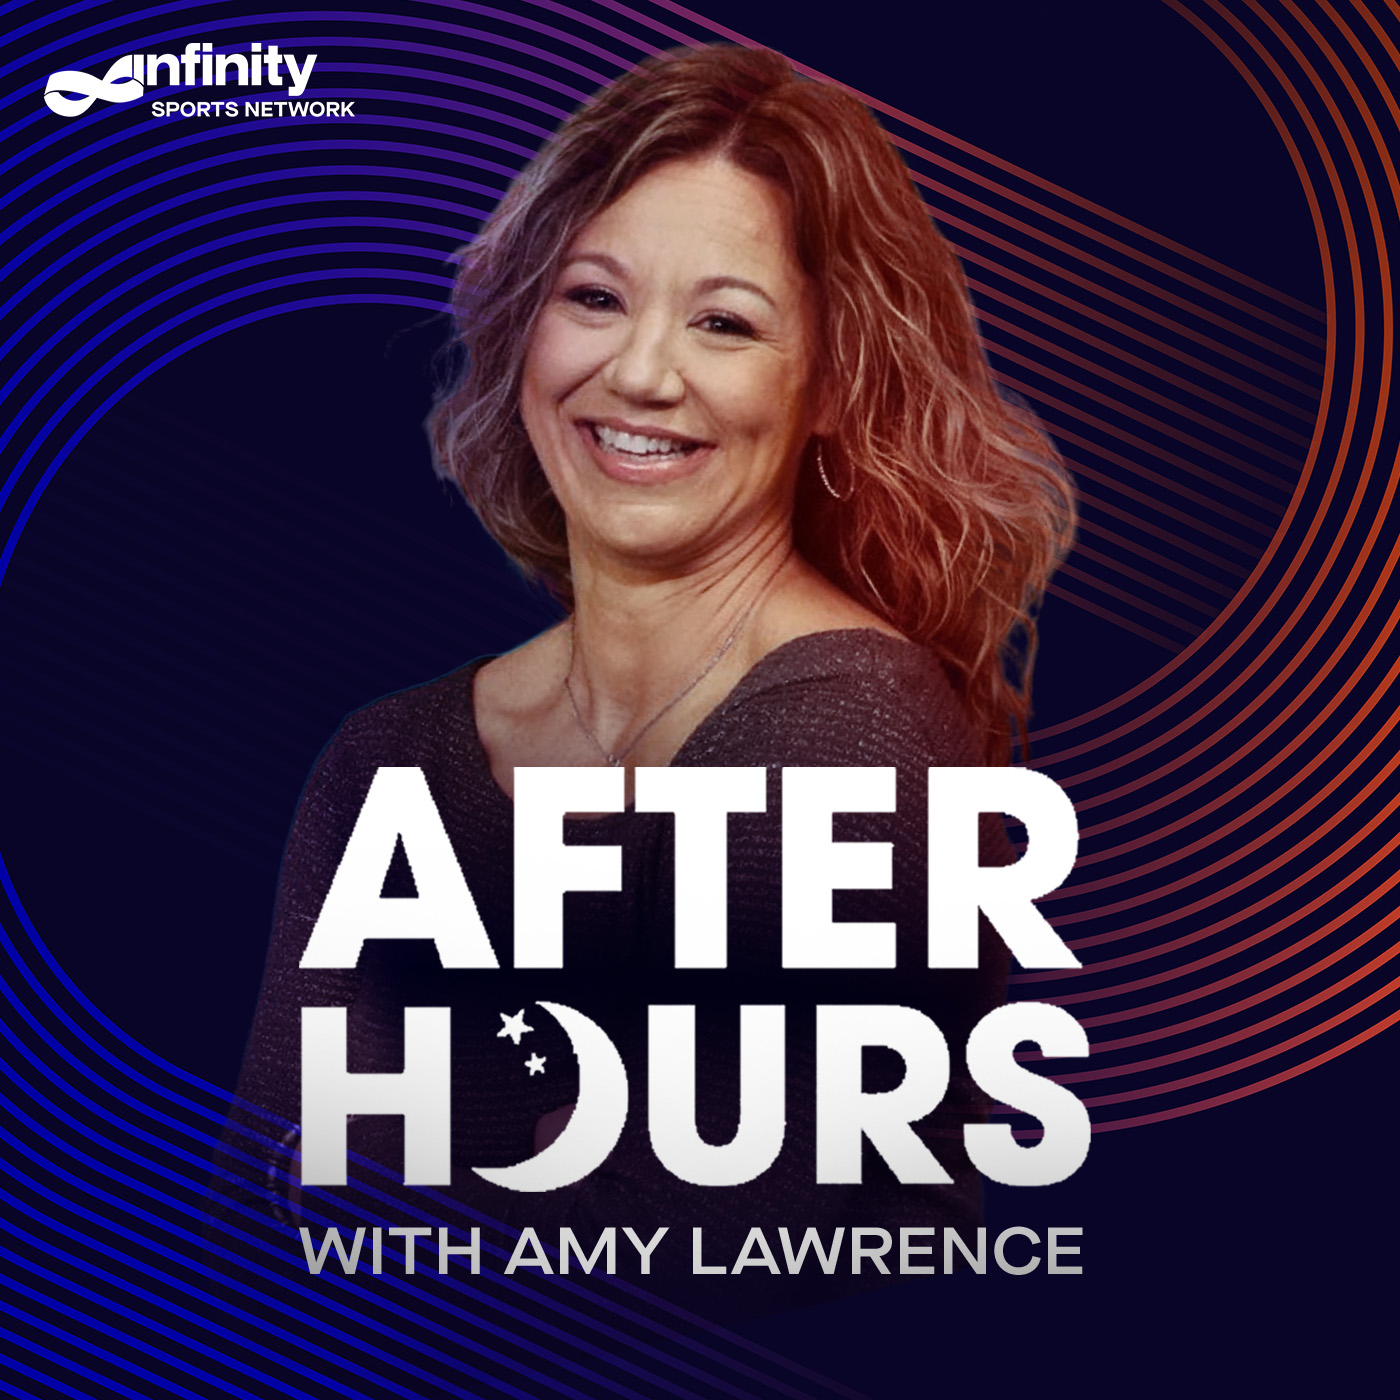 10-20-21 After Hours with Amy Lawrence PODCAST: Hour 2